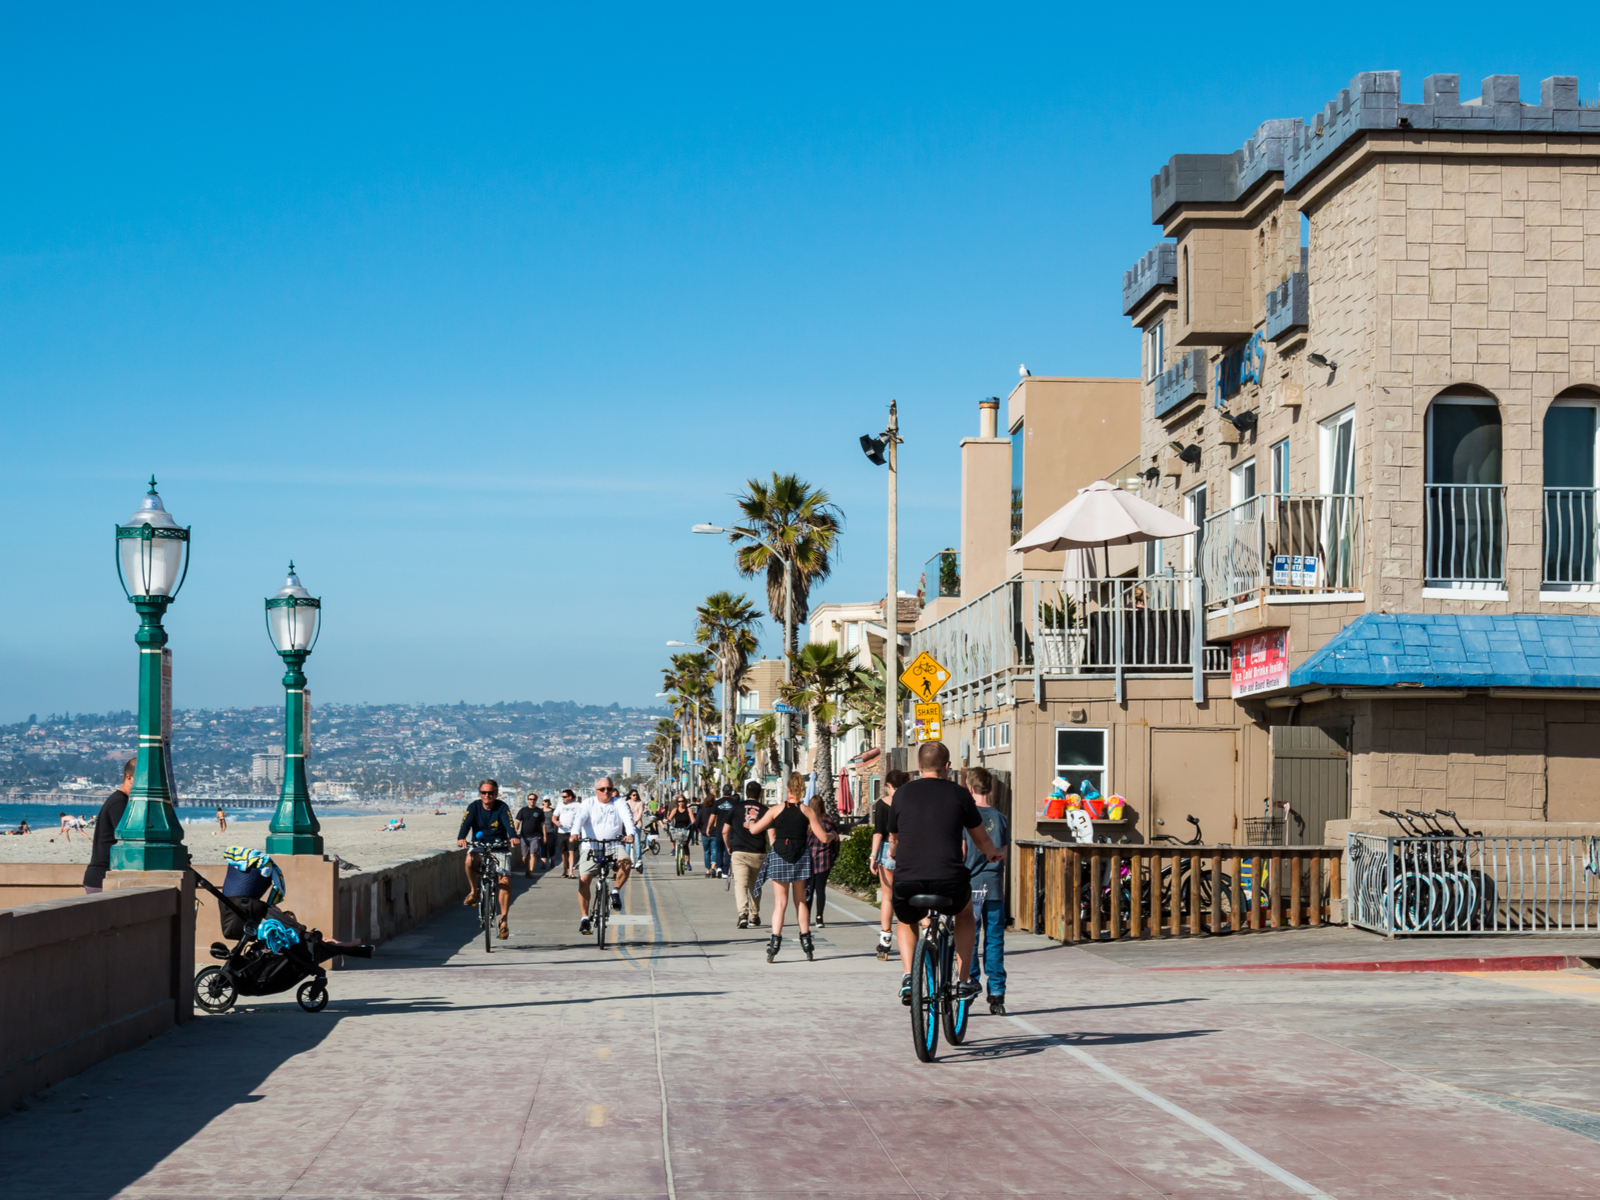 People riding bikes in the Mission Beach area, one of our picks for where to stay in San Diego